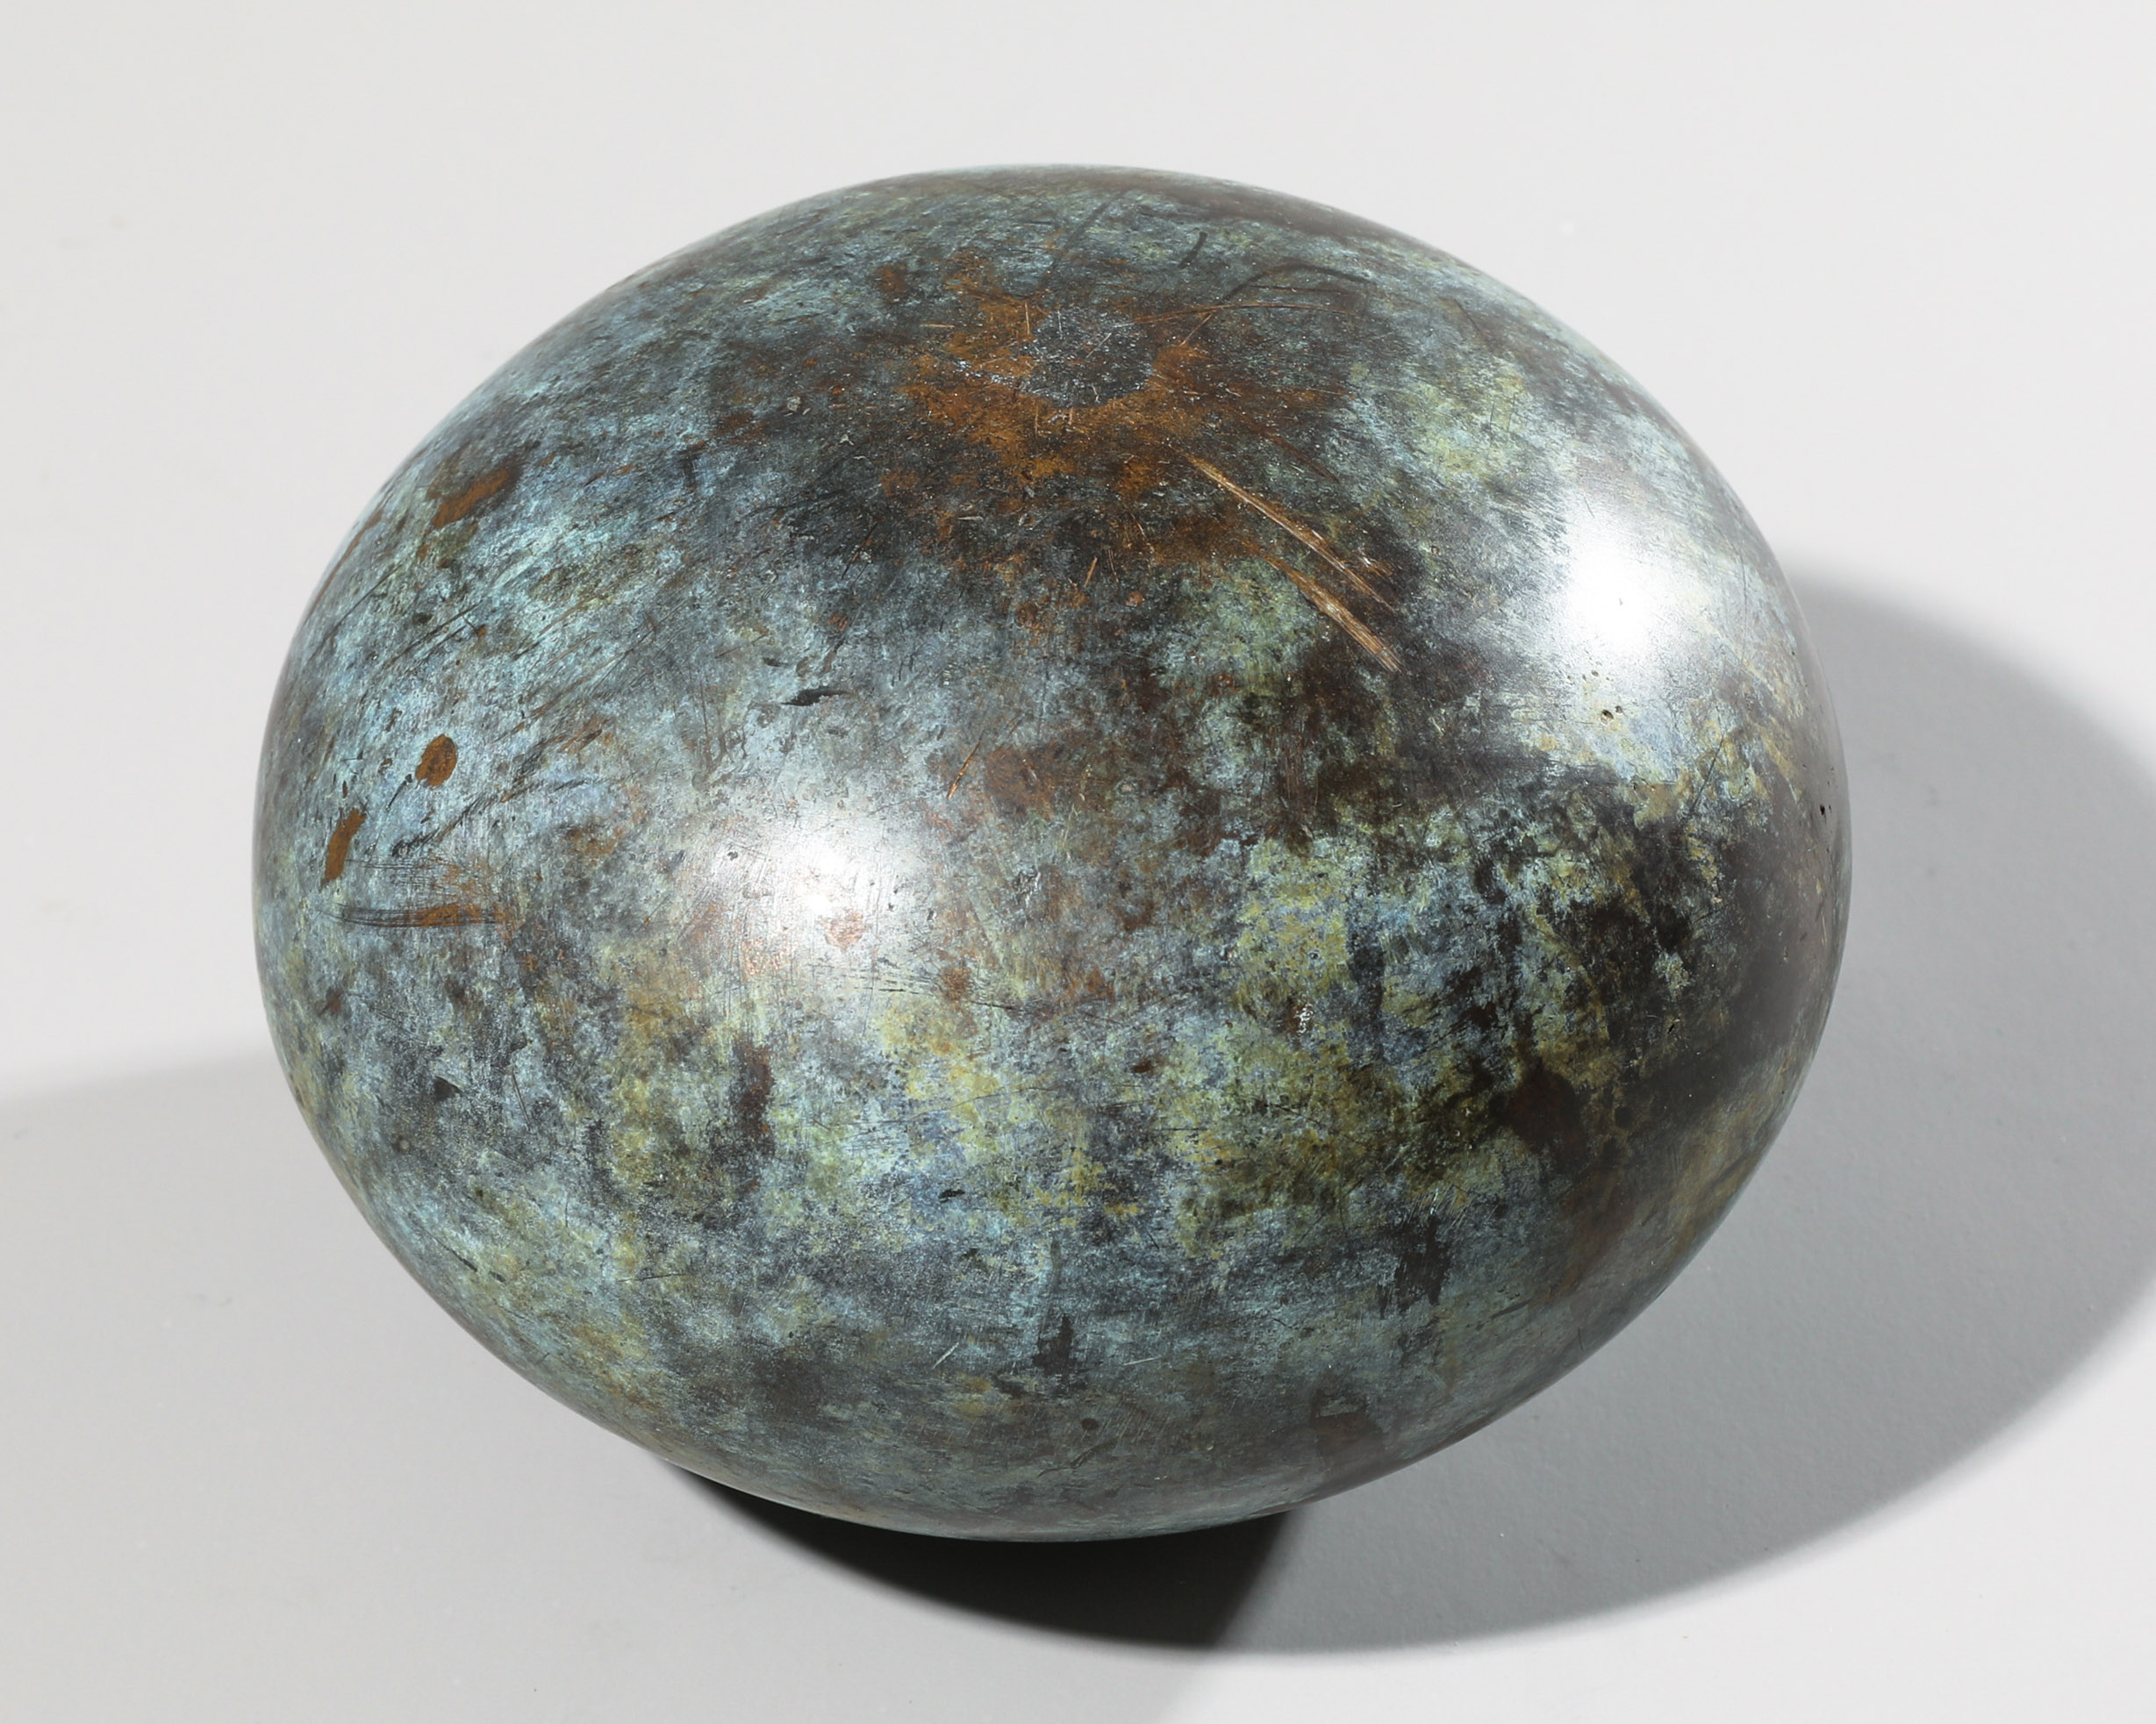 Riki Mijling, 2 objects, two-part iron sculpture, pressed bronze ball - Image 7 of 7